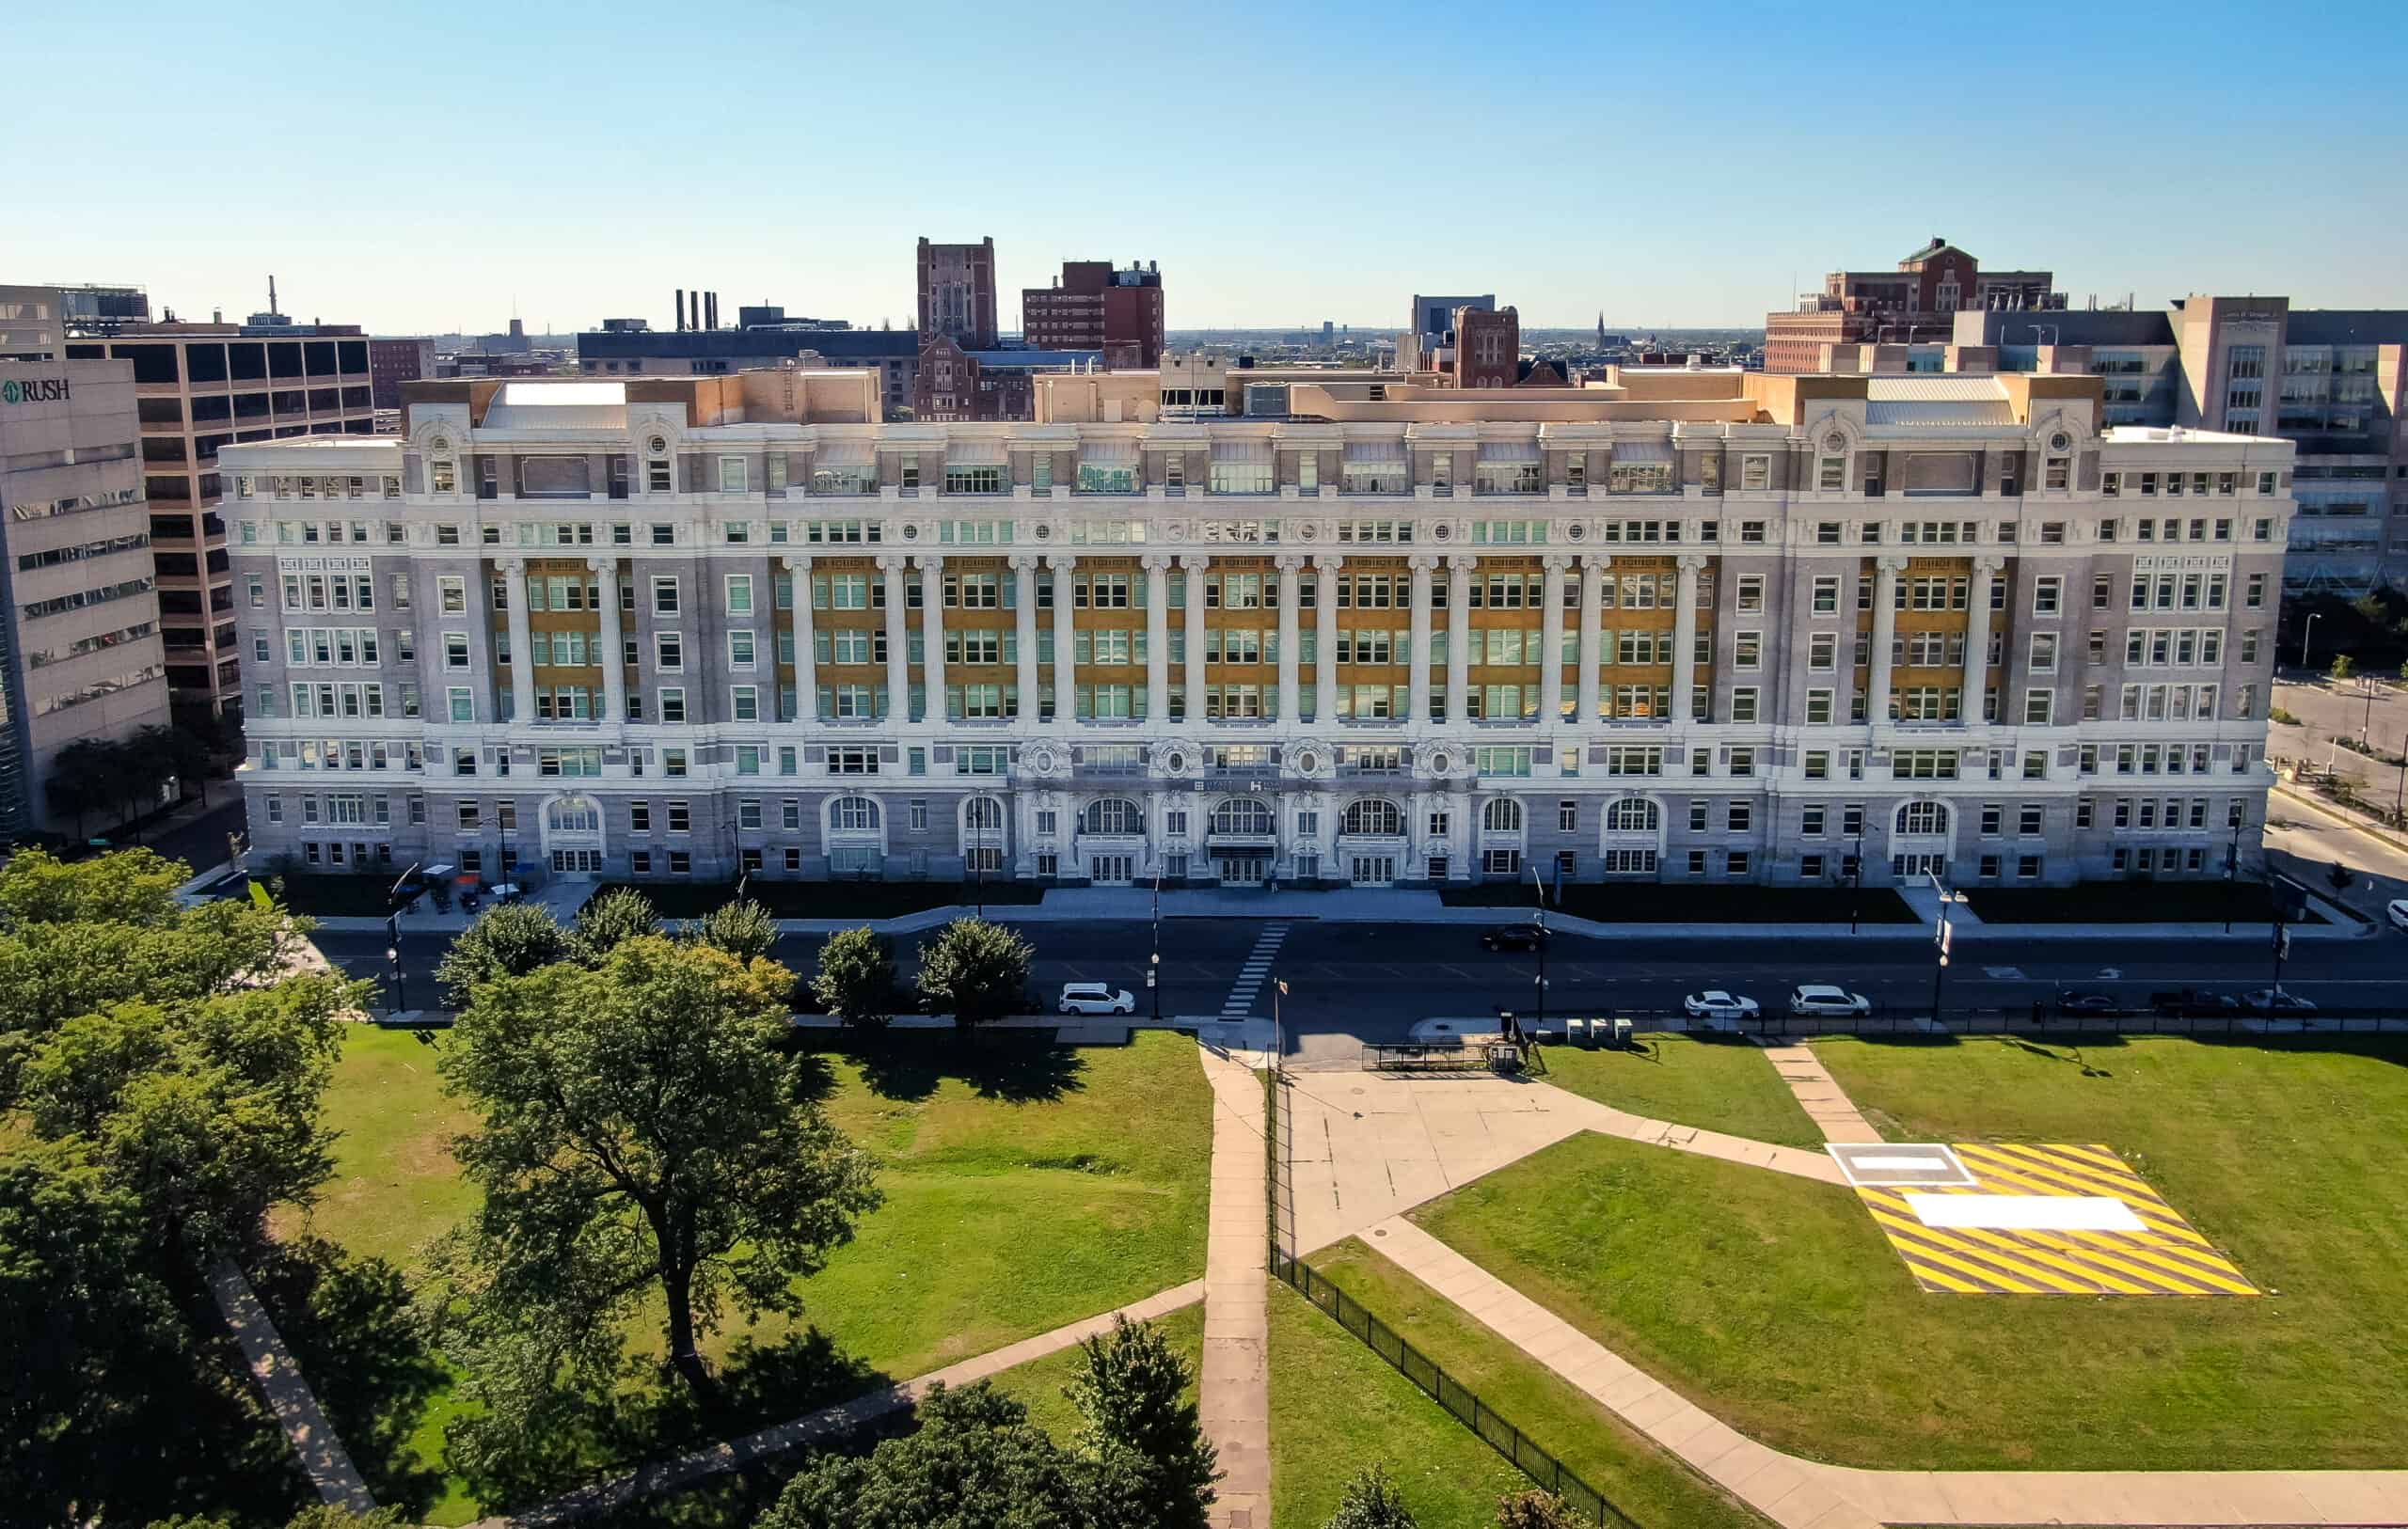 The old Cook County Hospital in Chicago has been recently restored and adapted into a hotel and commercial spaces. 